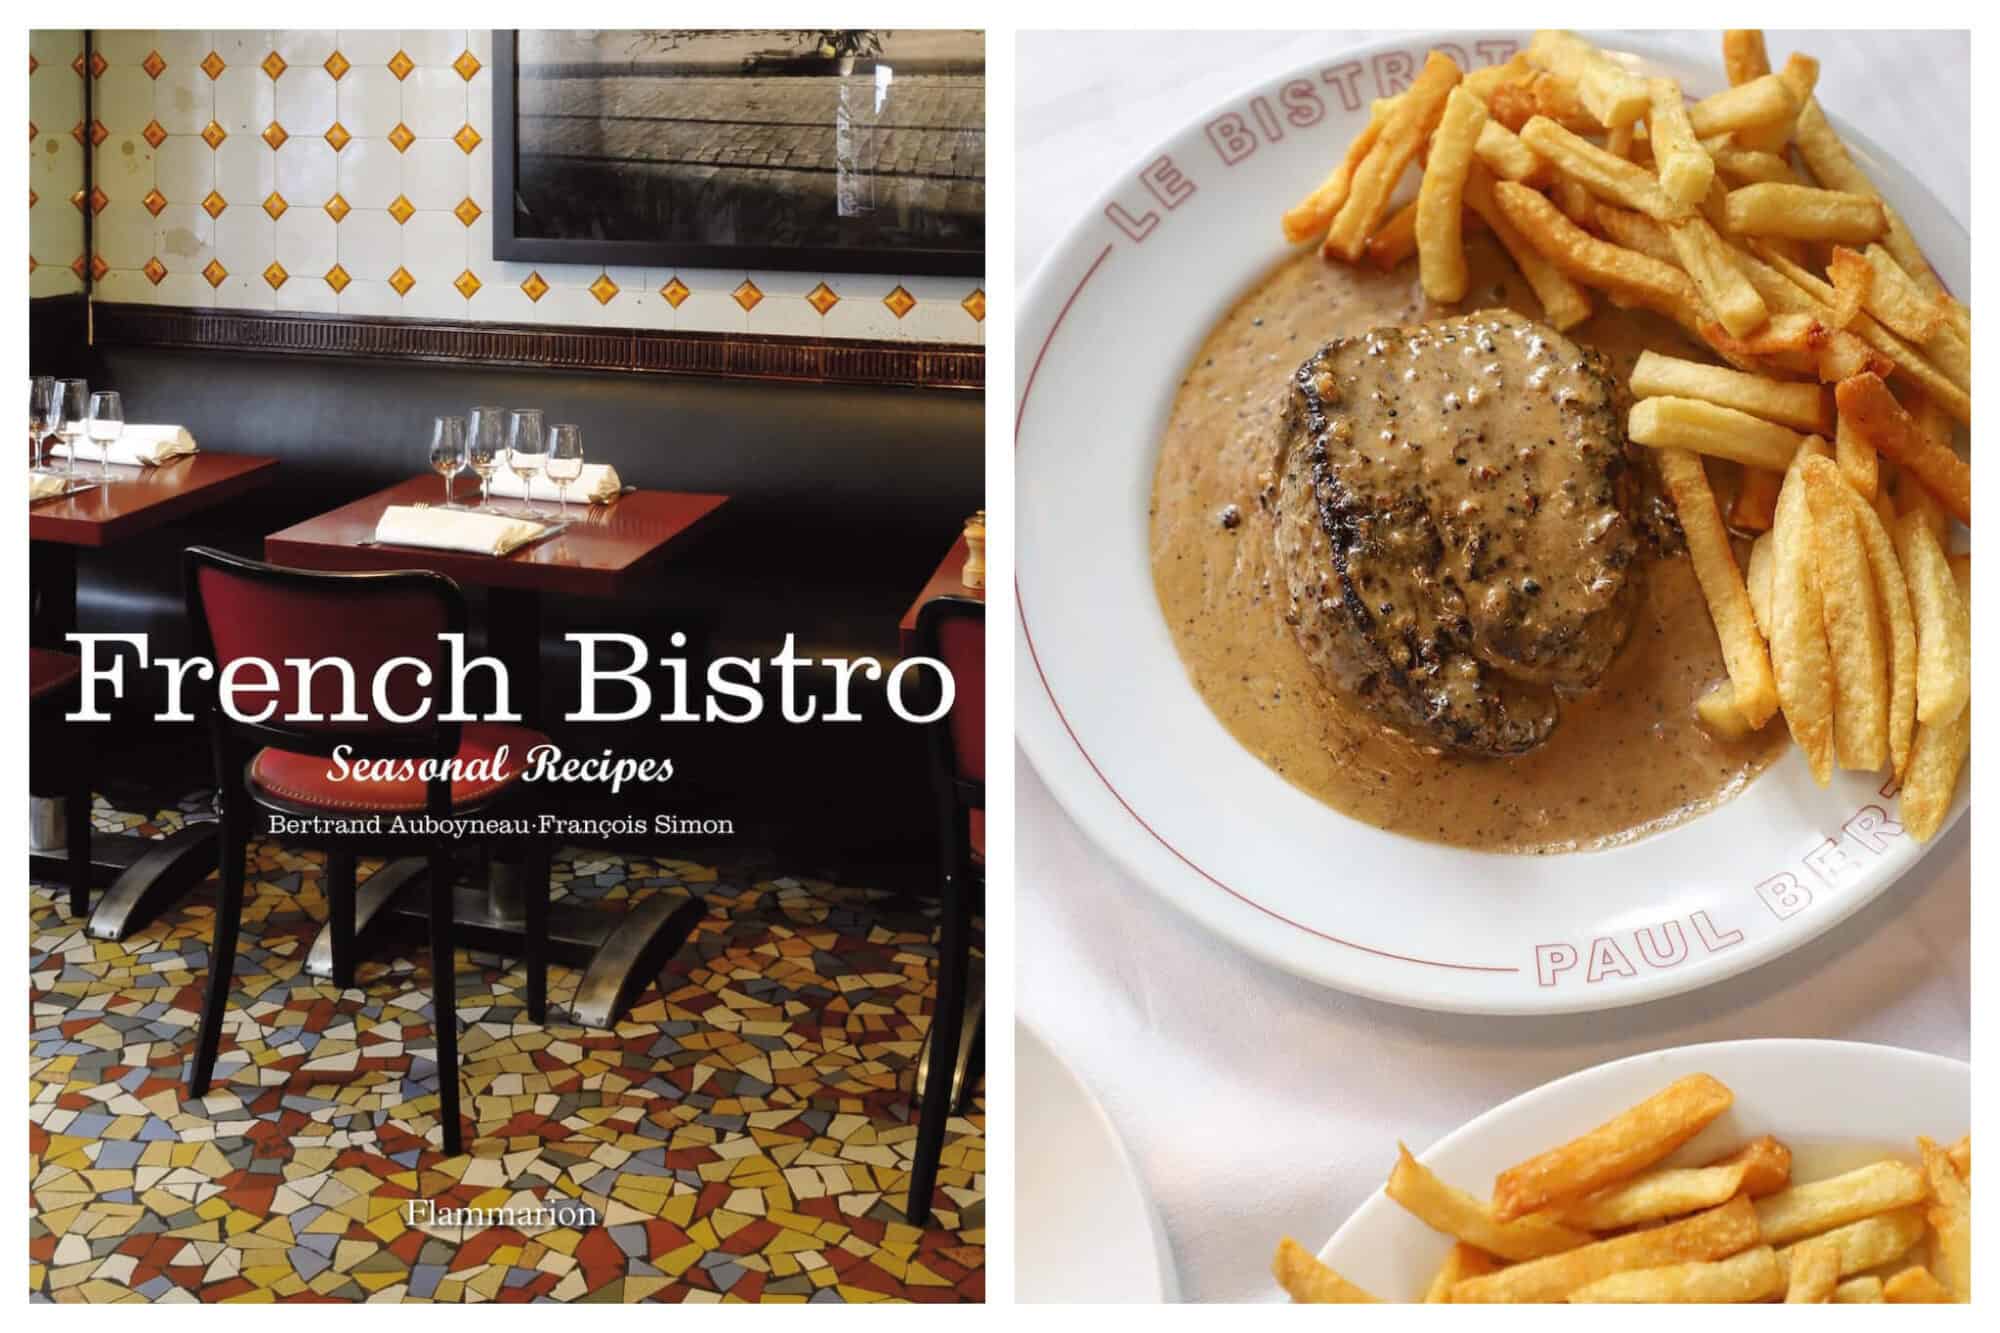 Left: the cover of the book "French Bistro." There is an image of a French bistro with several tables and chairs and the title of the book is written in white. Right: a plate of steak frites on a white plate with the words "Le Bistrot Paul Bert" written on the edges in red. A second plate with fries is visible at the bottom of the image.